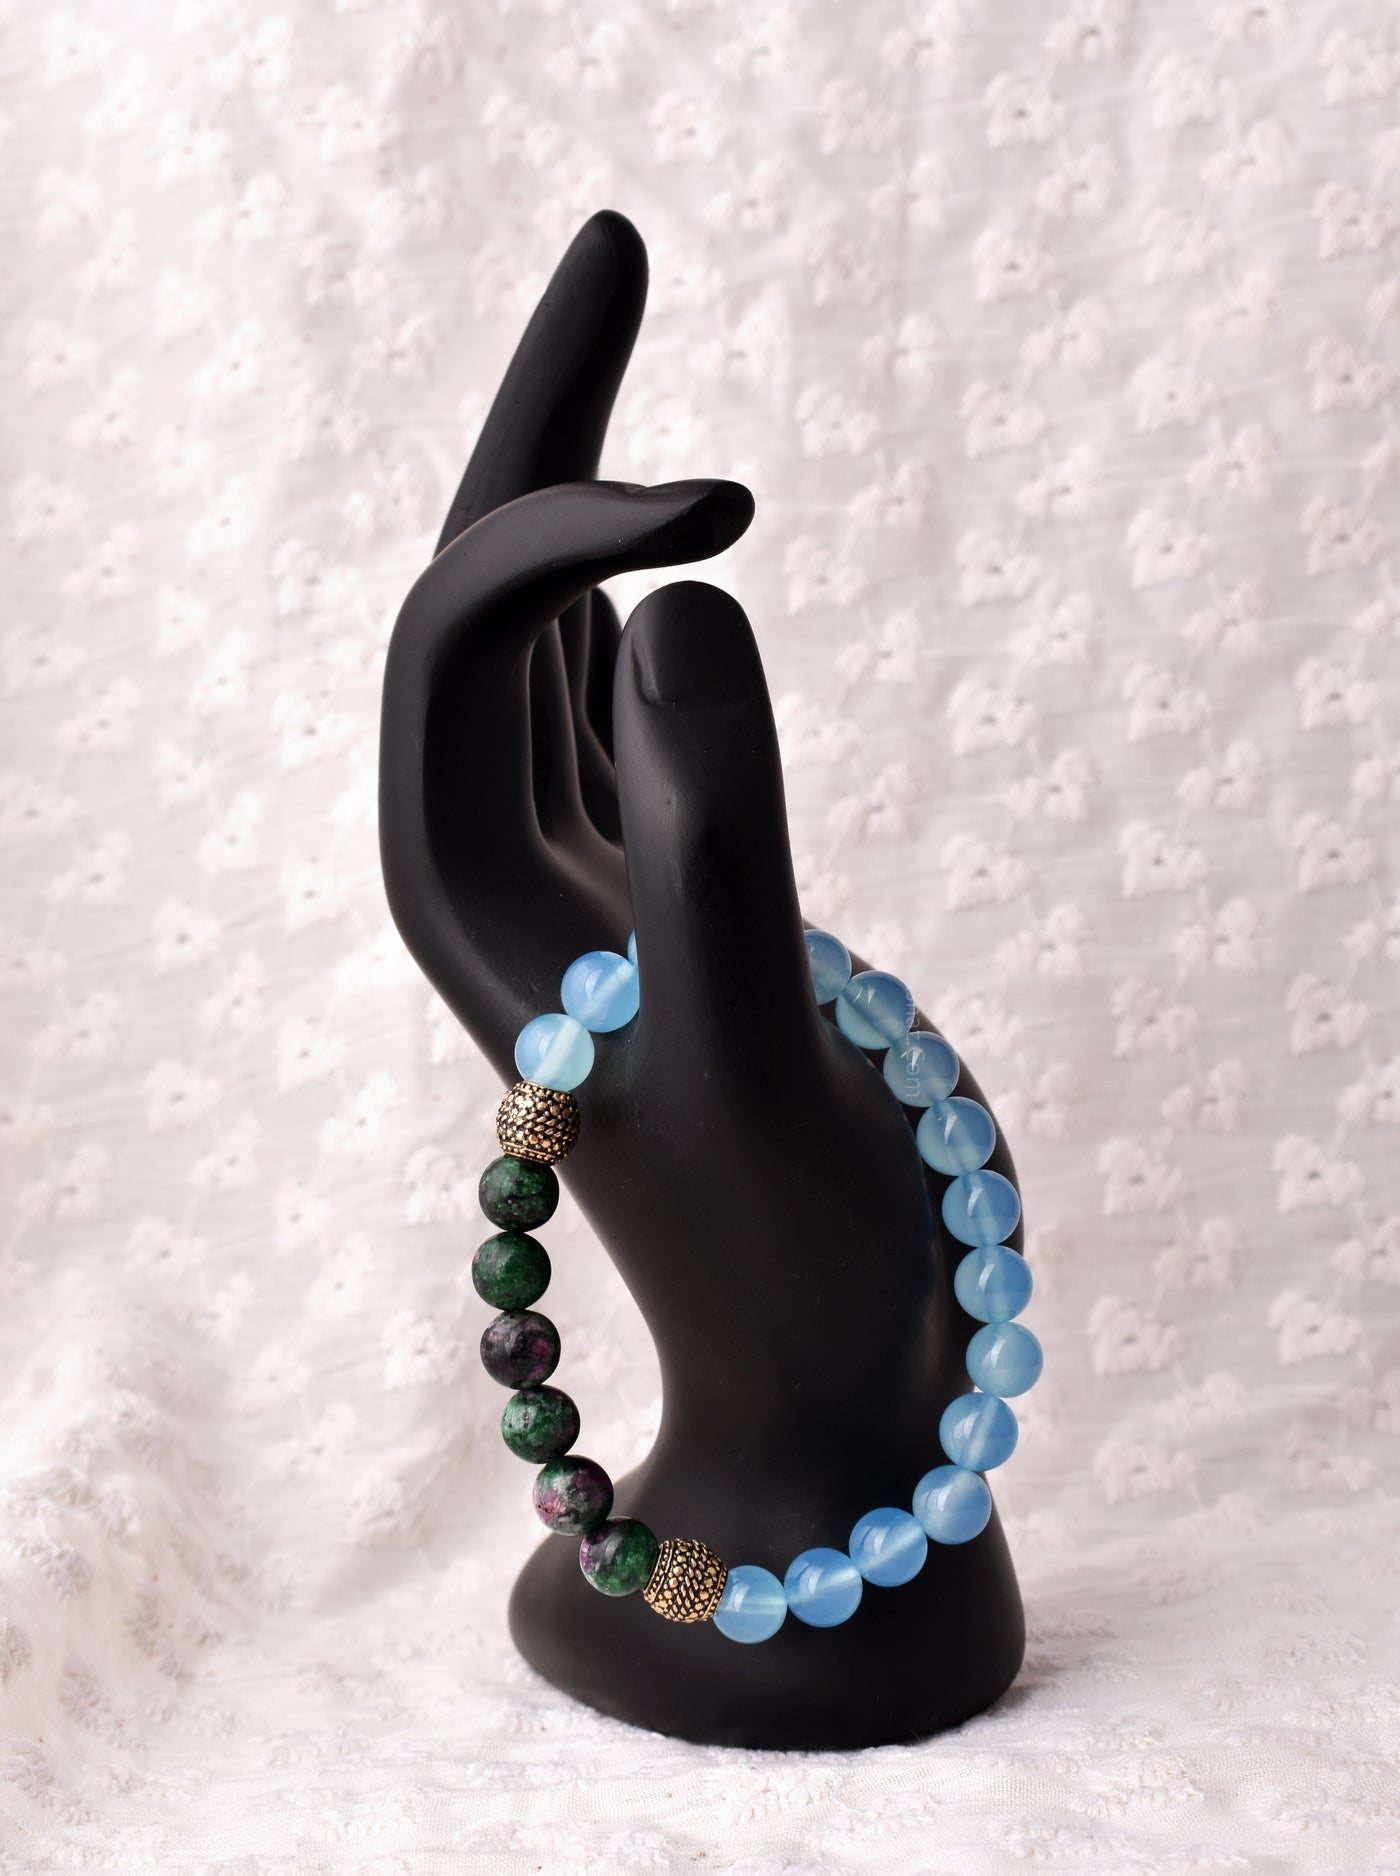 Round Beaded Stretch Bracelet, 8mm Round Light Blue Onyx Beads, Ruby Ziosite Beads With Real Gold Plated Beads.